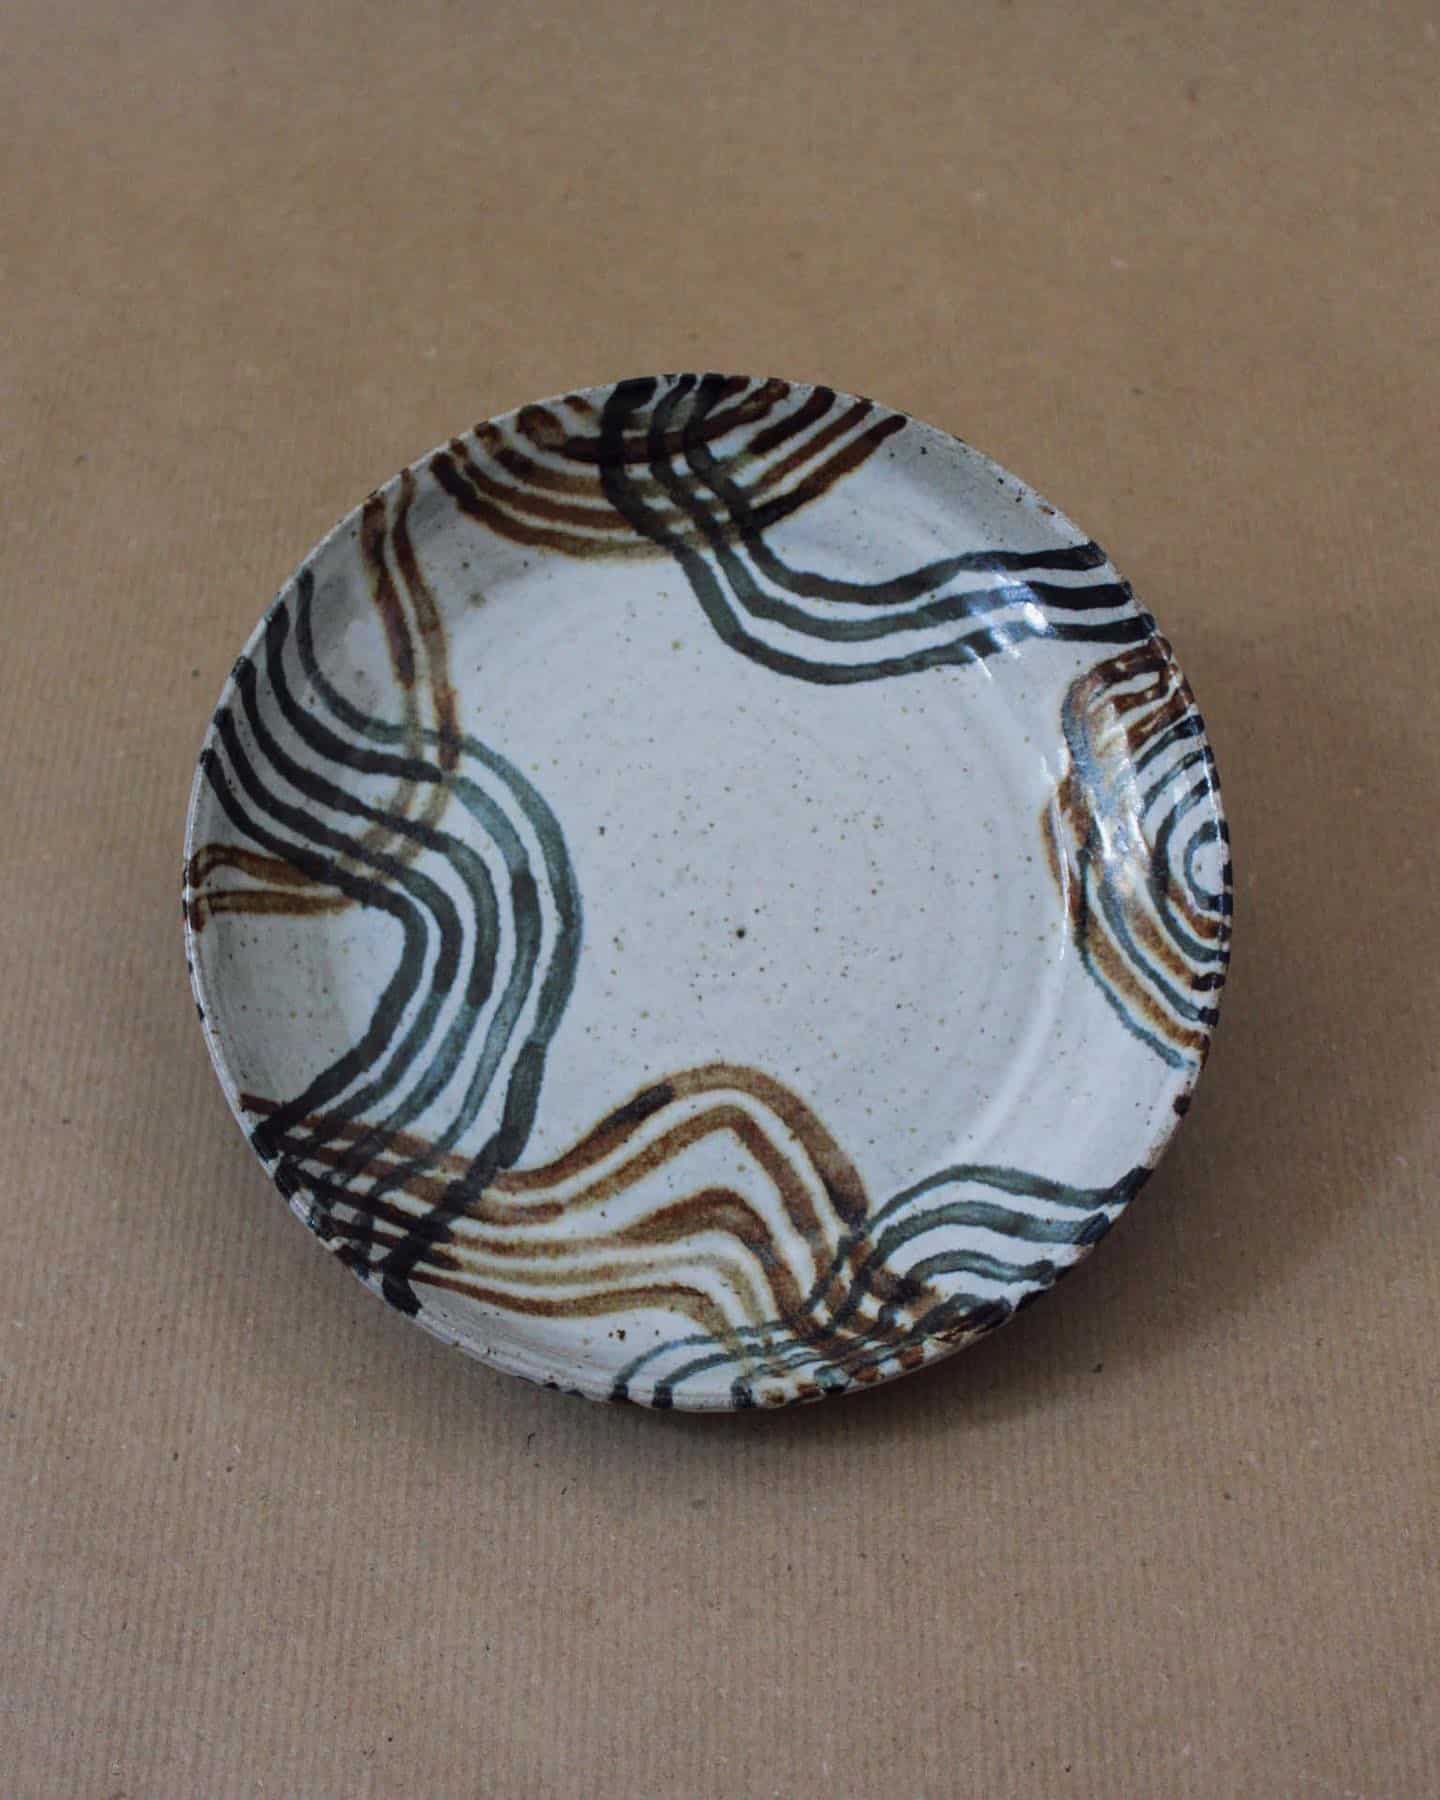 thrown ceramic plate with oxide brushstroke line patterns